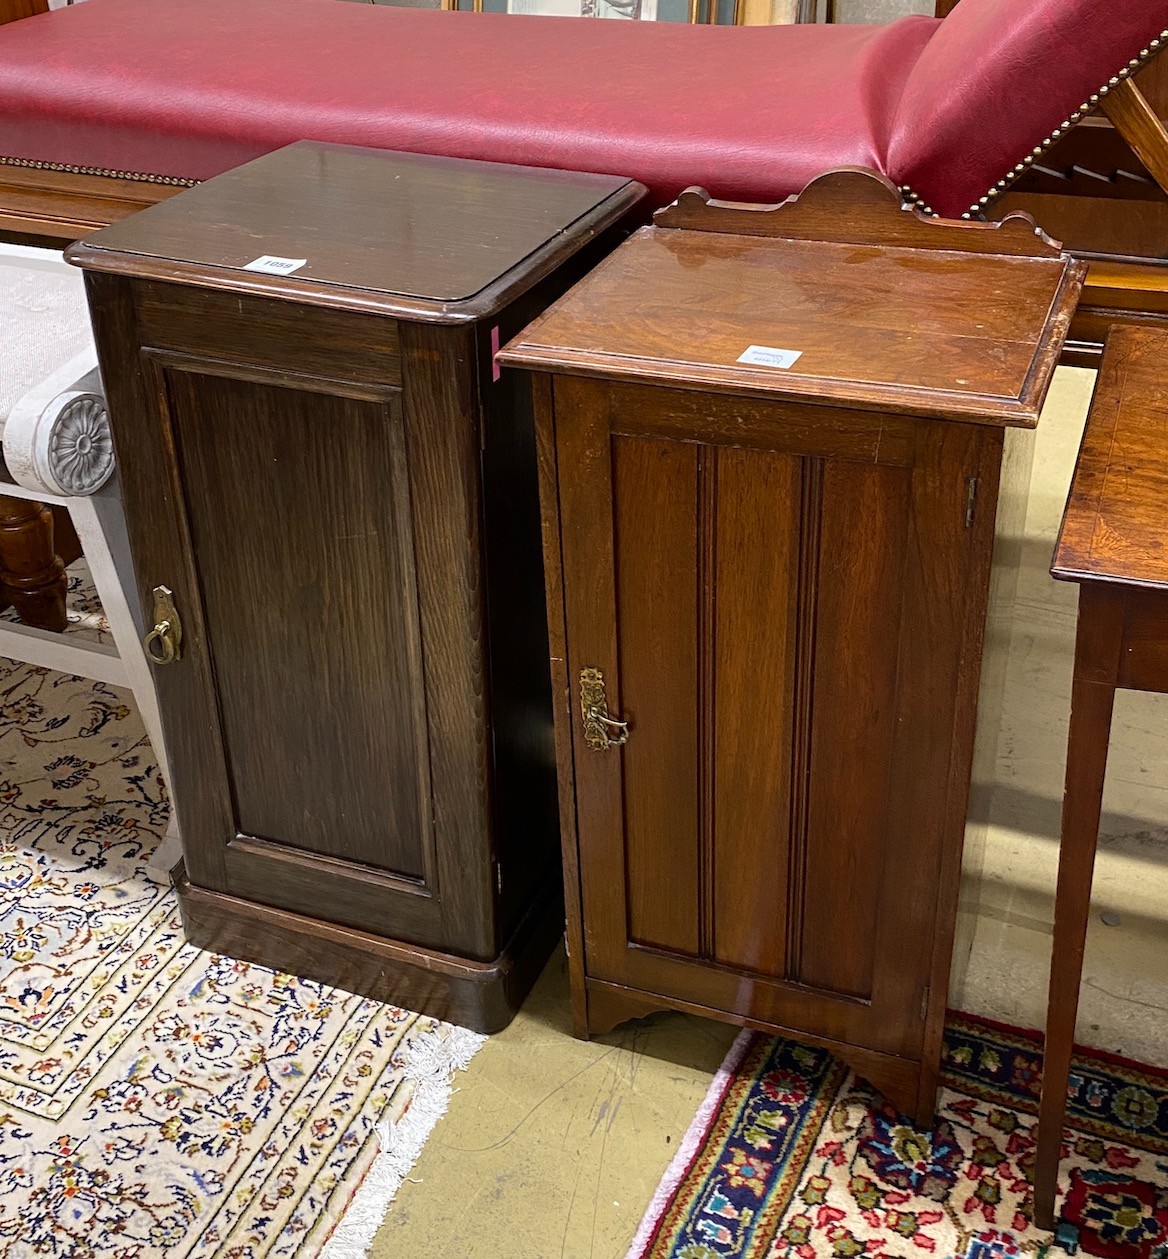 An Edwardian stained pine bedside cupboard and a similar late Victorian oak cupboard